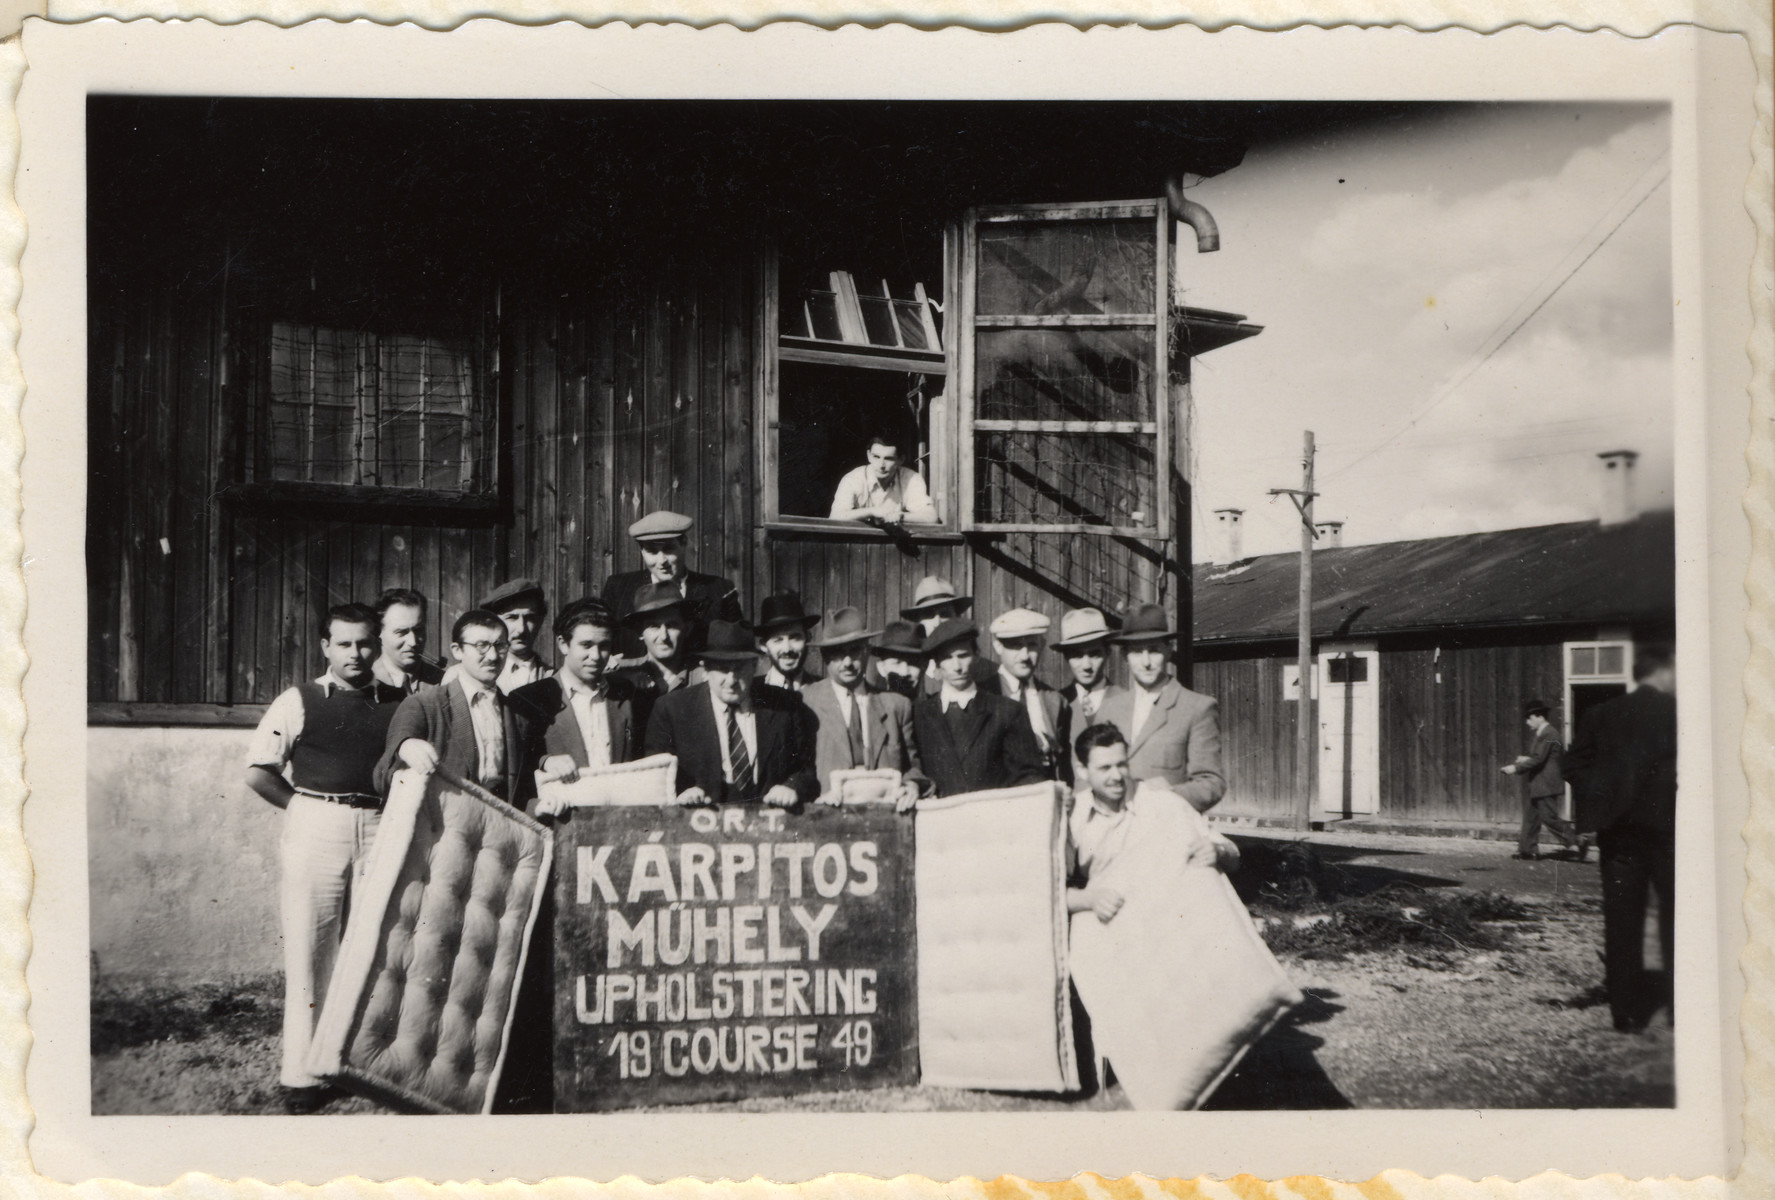 A group of Jewish men pose with the mattresses they made in the ORT upholstering course in the Hallein displaced persons' camp.